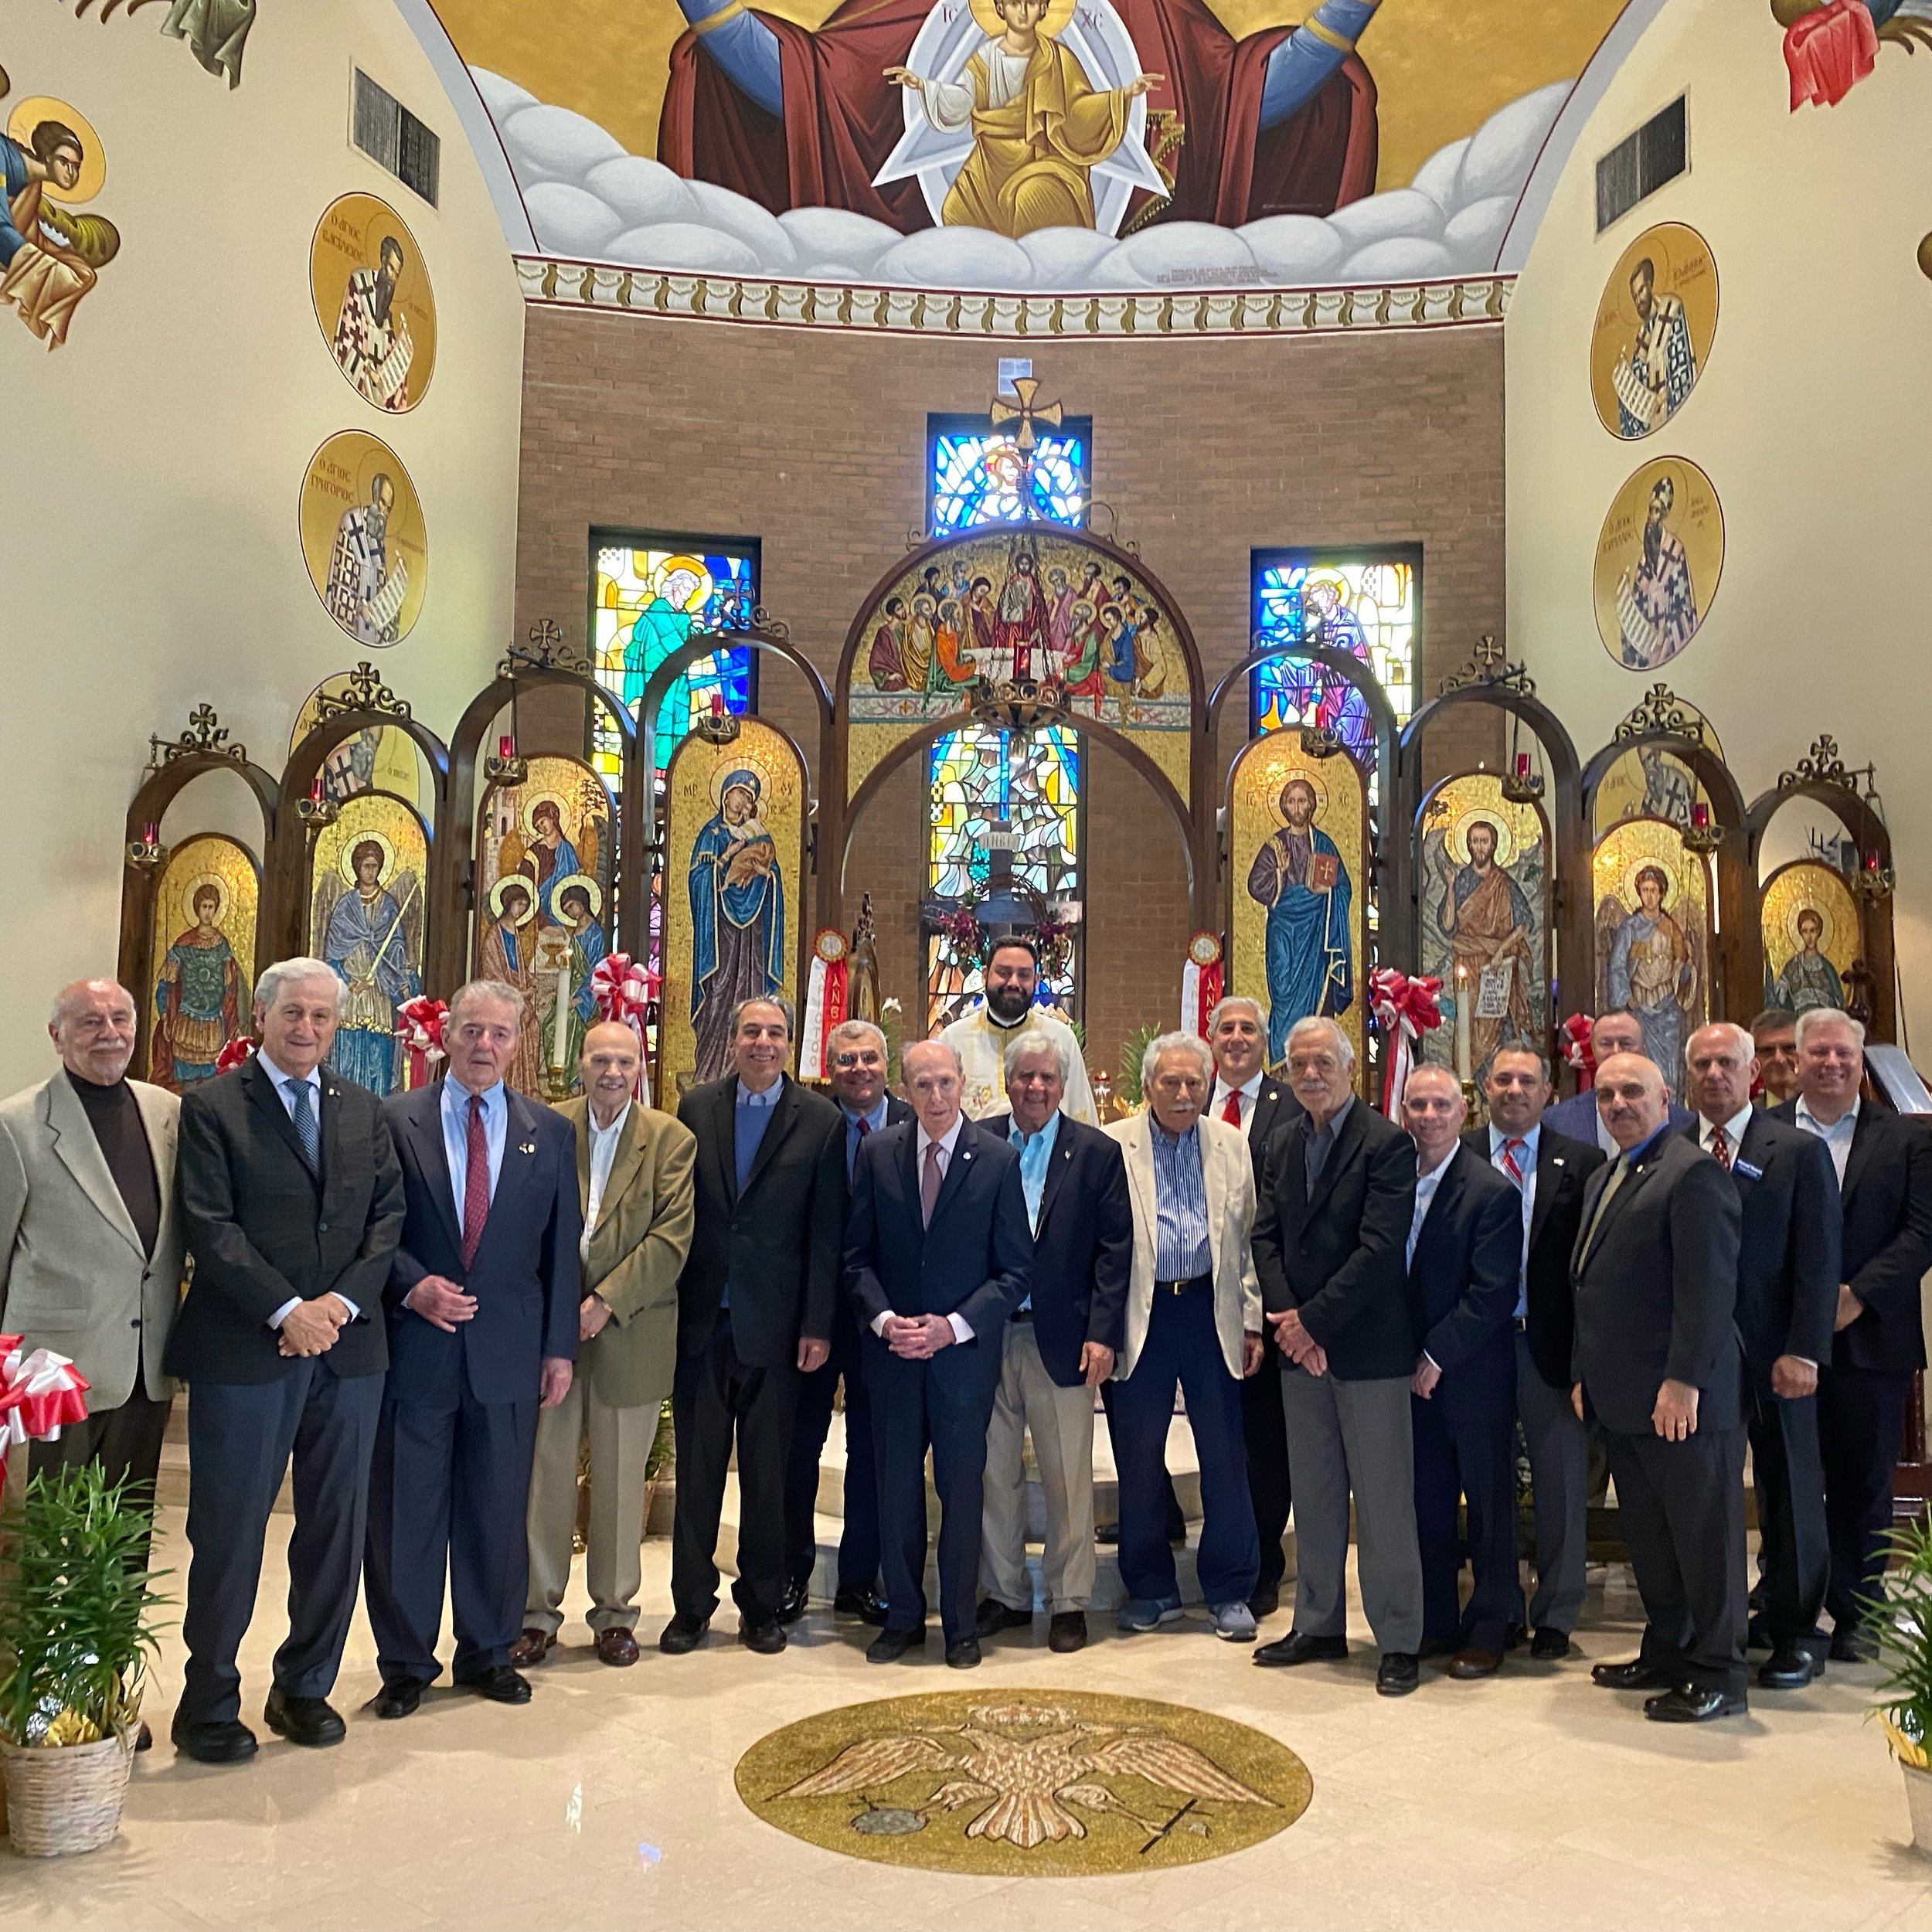 His Eminence Archbishop Elpidophoros of America proclaimed today as &ldquo;AHEPA Sunday&rdquo; throughout the Greek Orthodox Archdiocese of America and in his Encyclical the Archbishop emphasized: 

&ldquo;On this AHEPA Sunday, when the Greek Orthodo